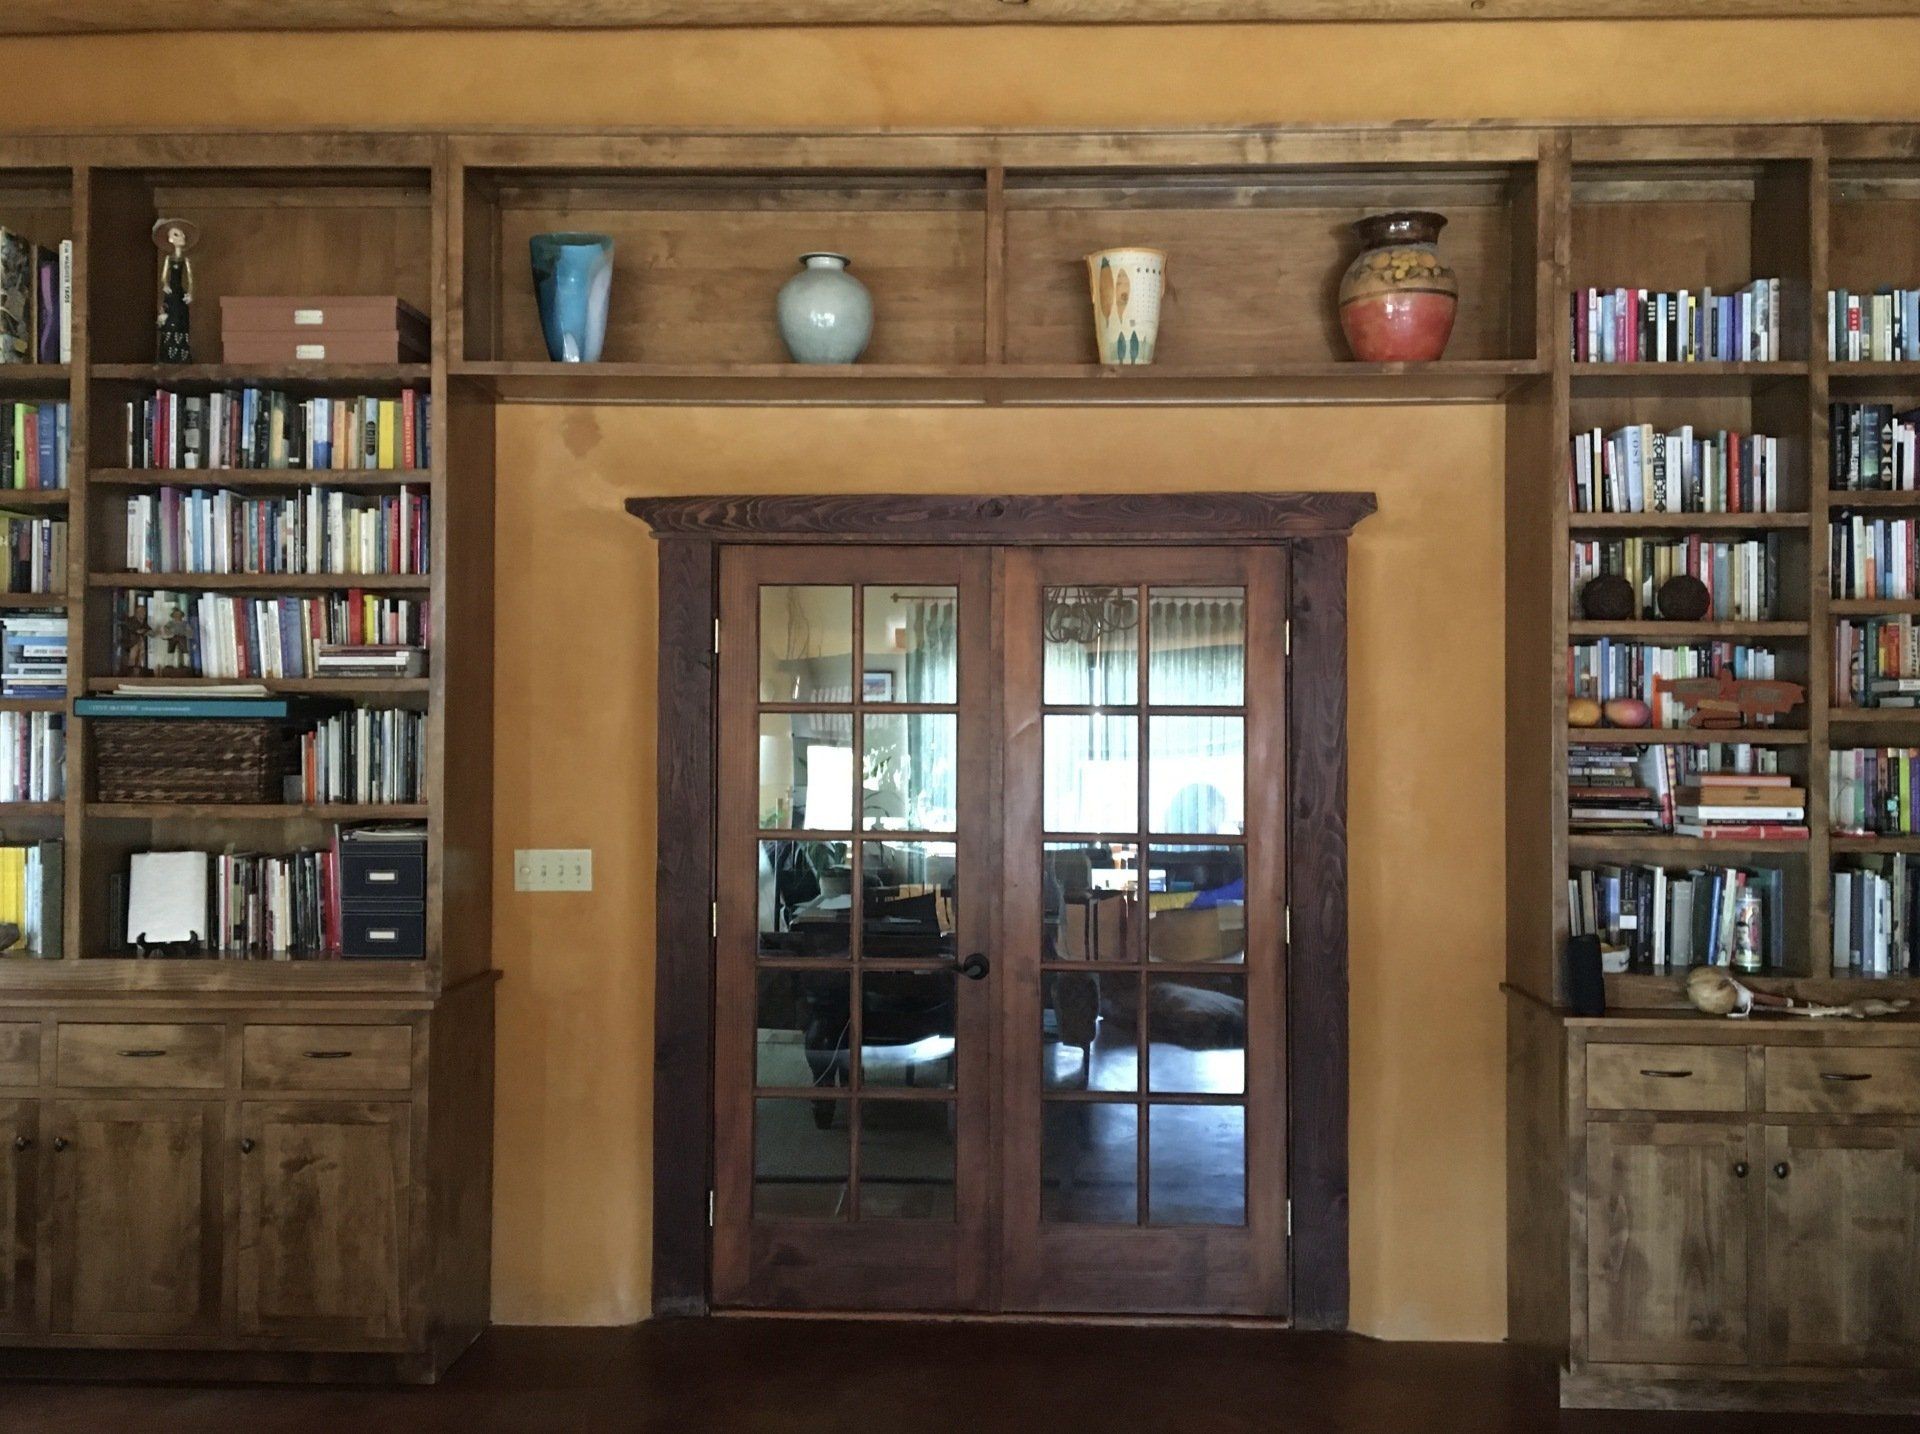 Interior glass door with towering wooden bookshelves filled with books on either side